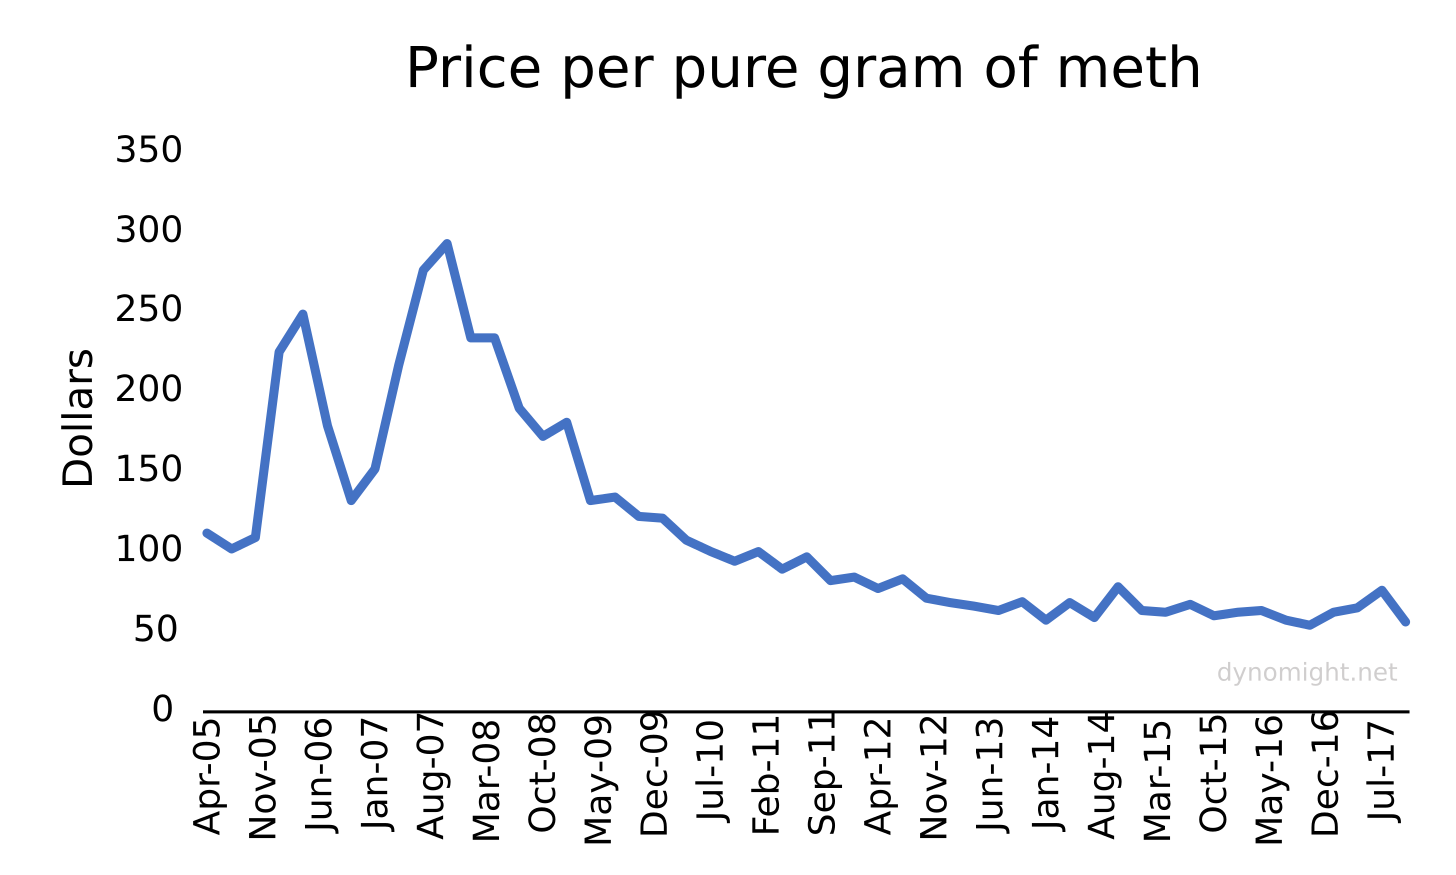 price of meth over time